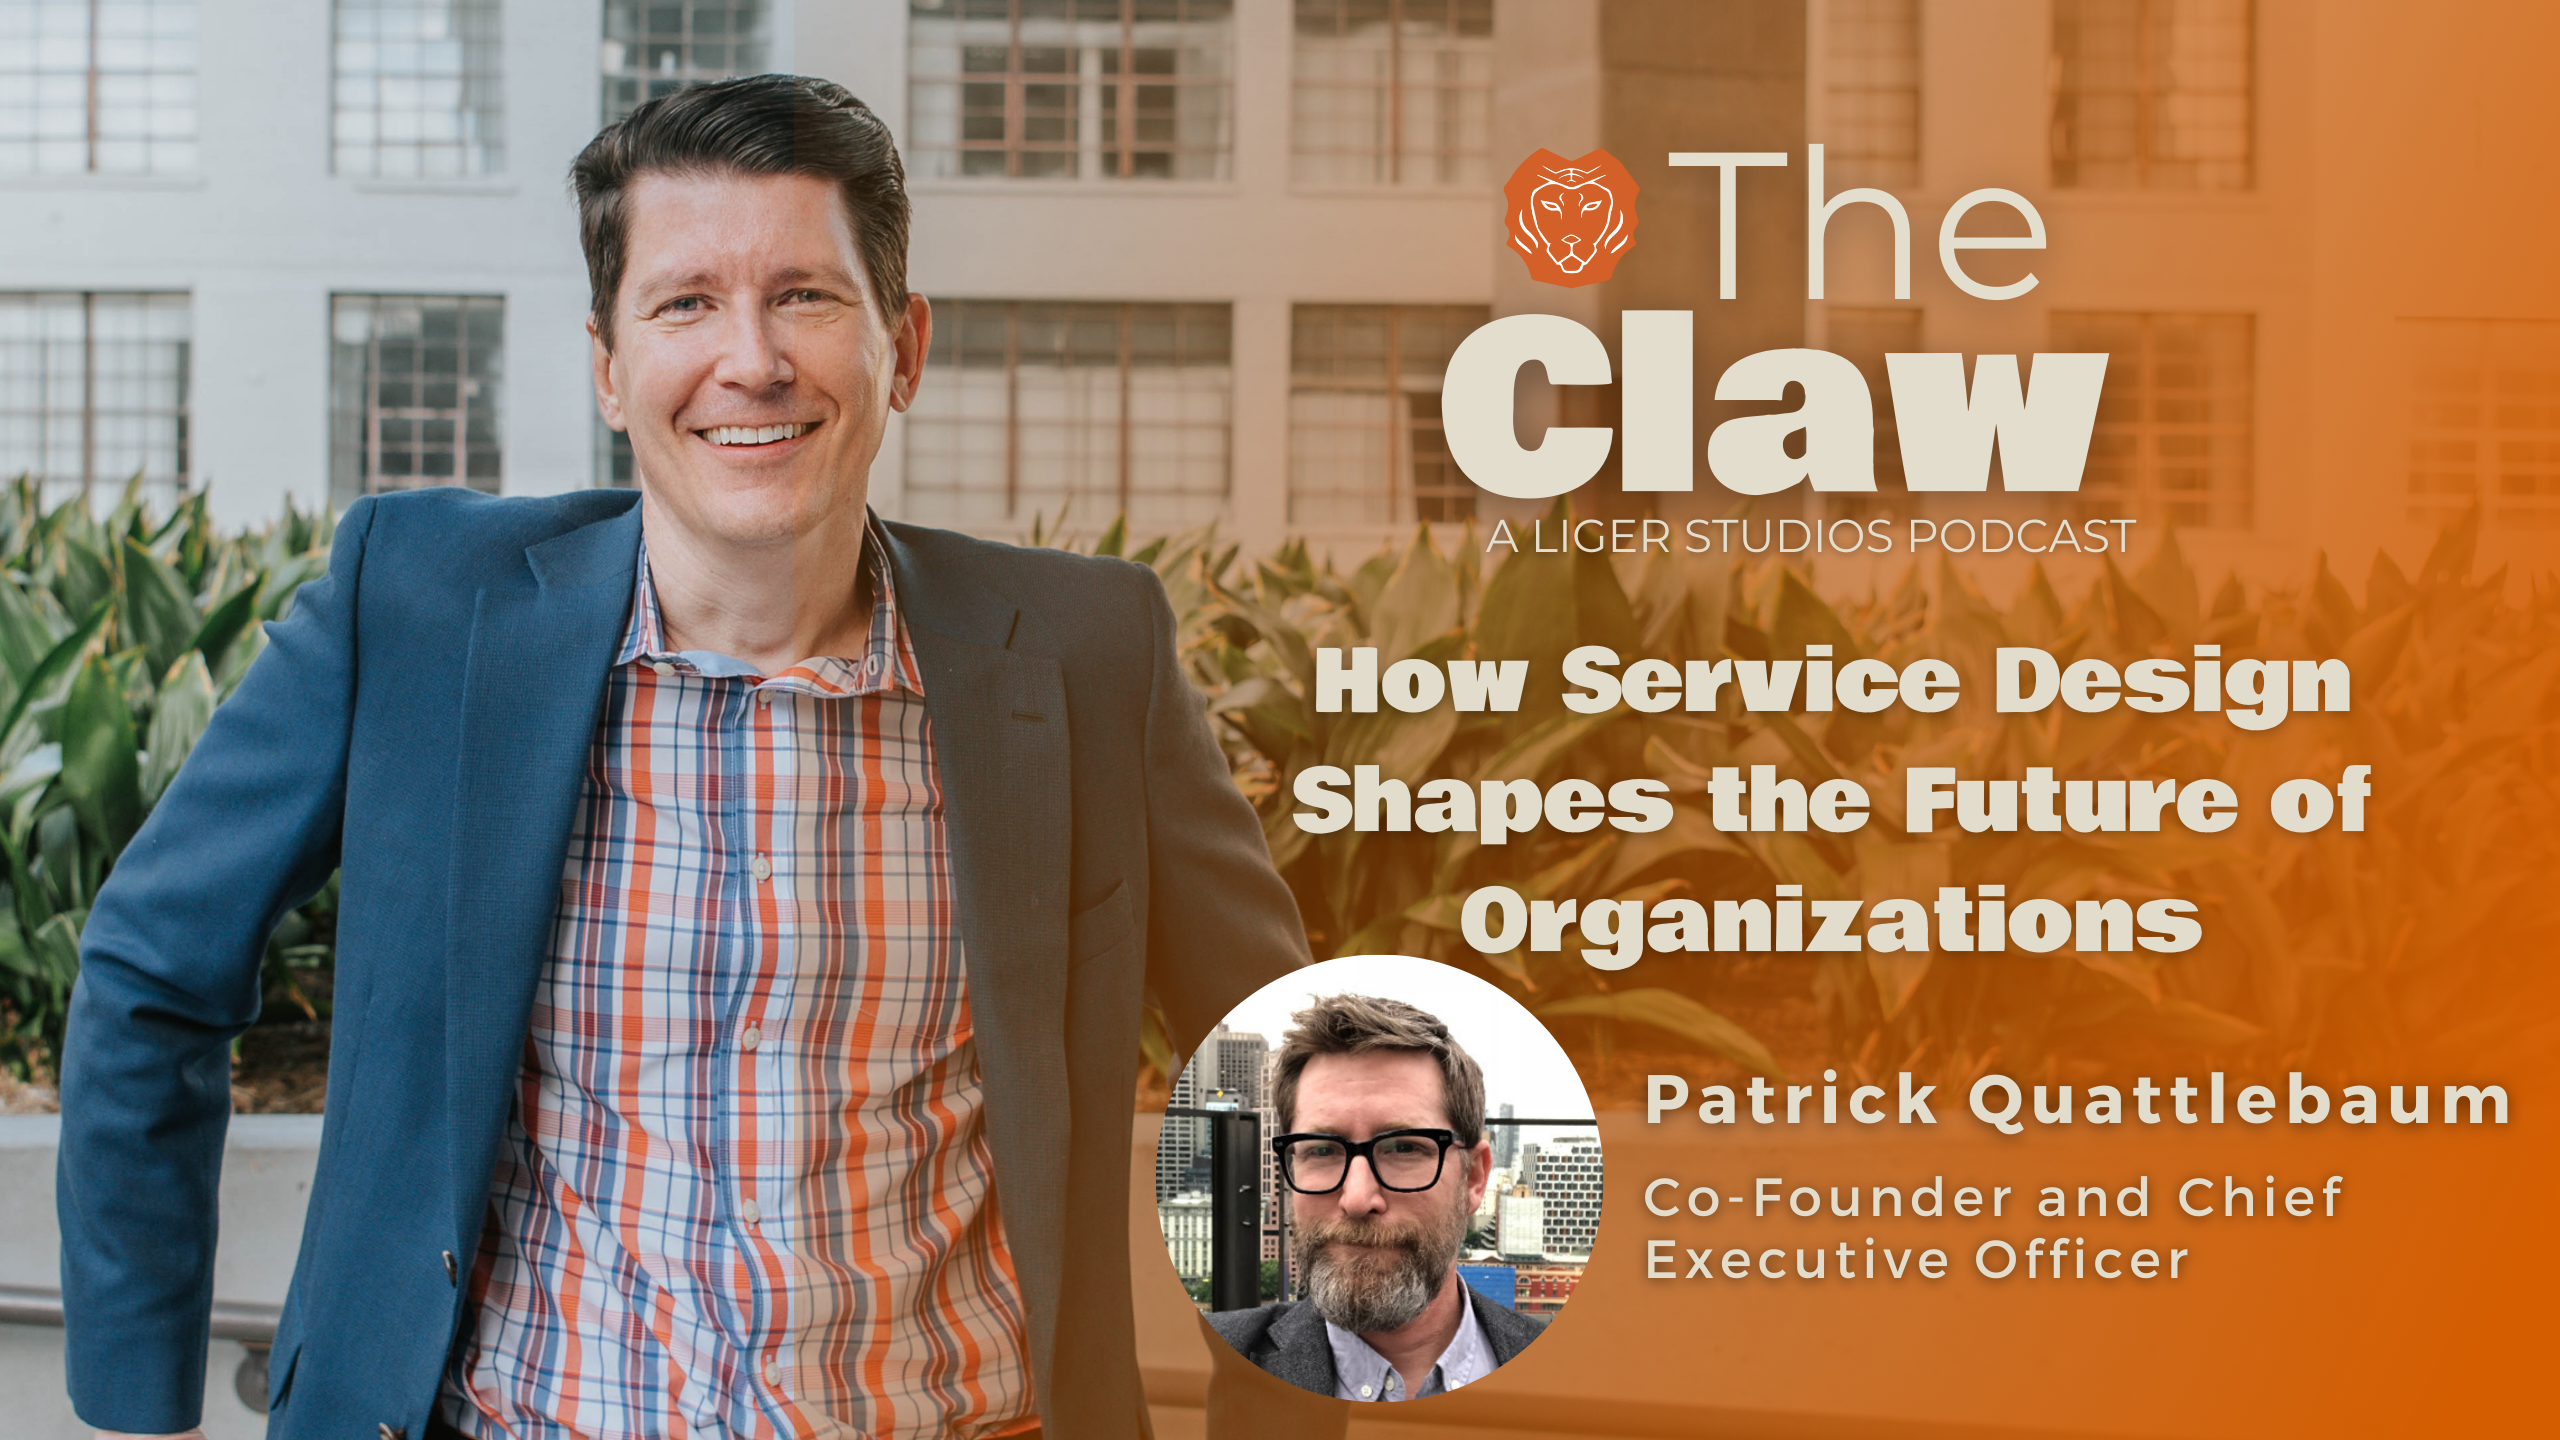 The Claw Podcast: How Service Design Shapes the Future of Organizations with Patrick Quattlebaum